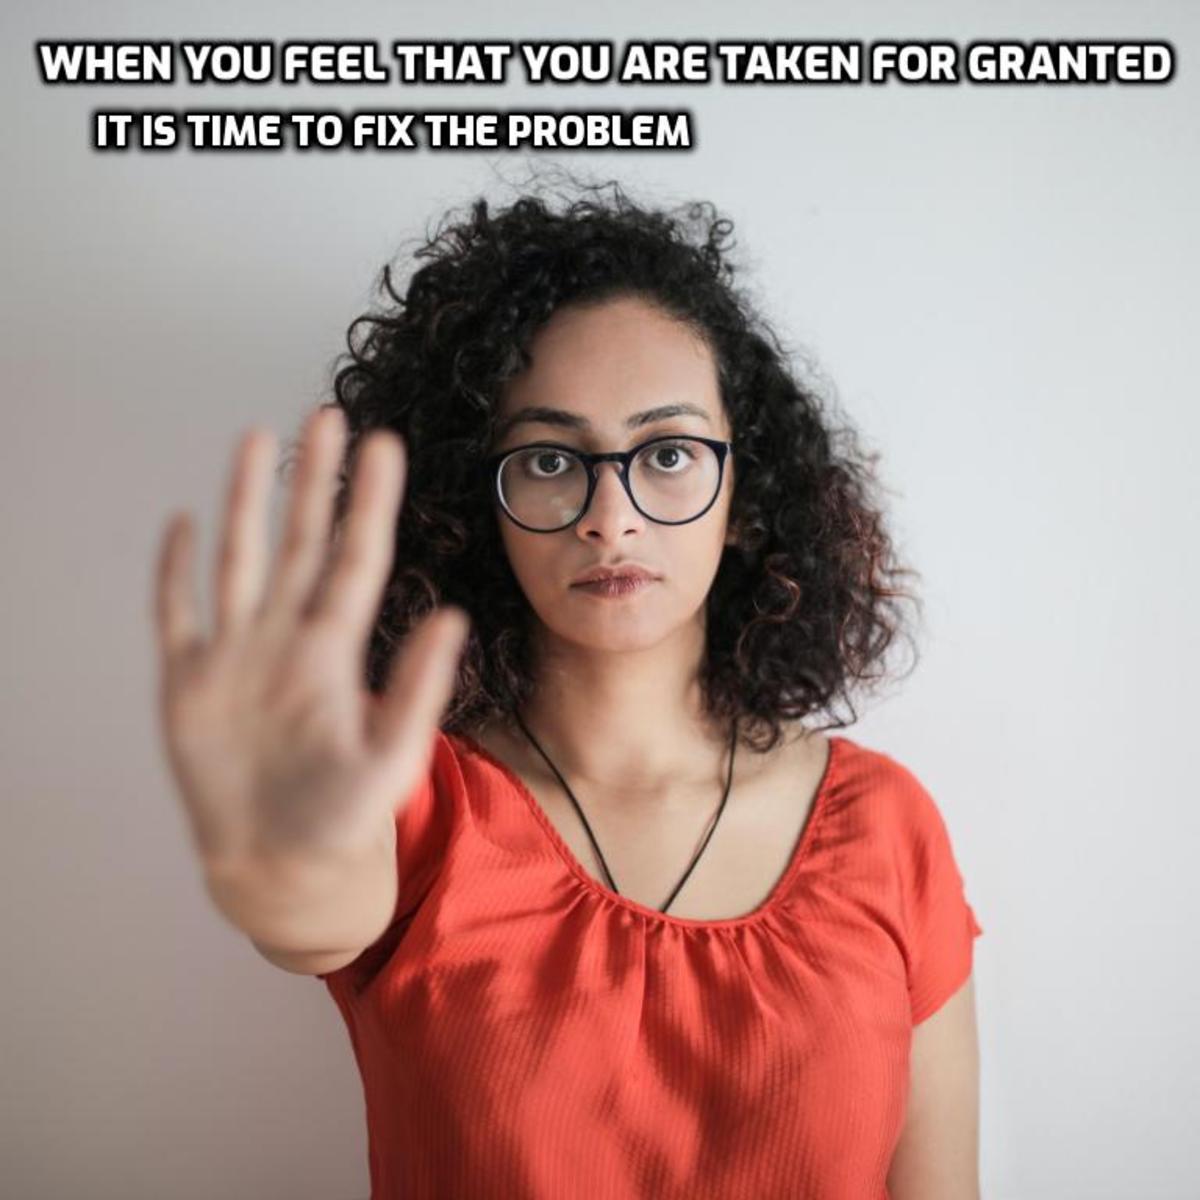 When You Feel That You Are Taken for Granted: It Is Time to Fix the Problem